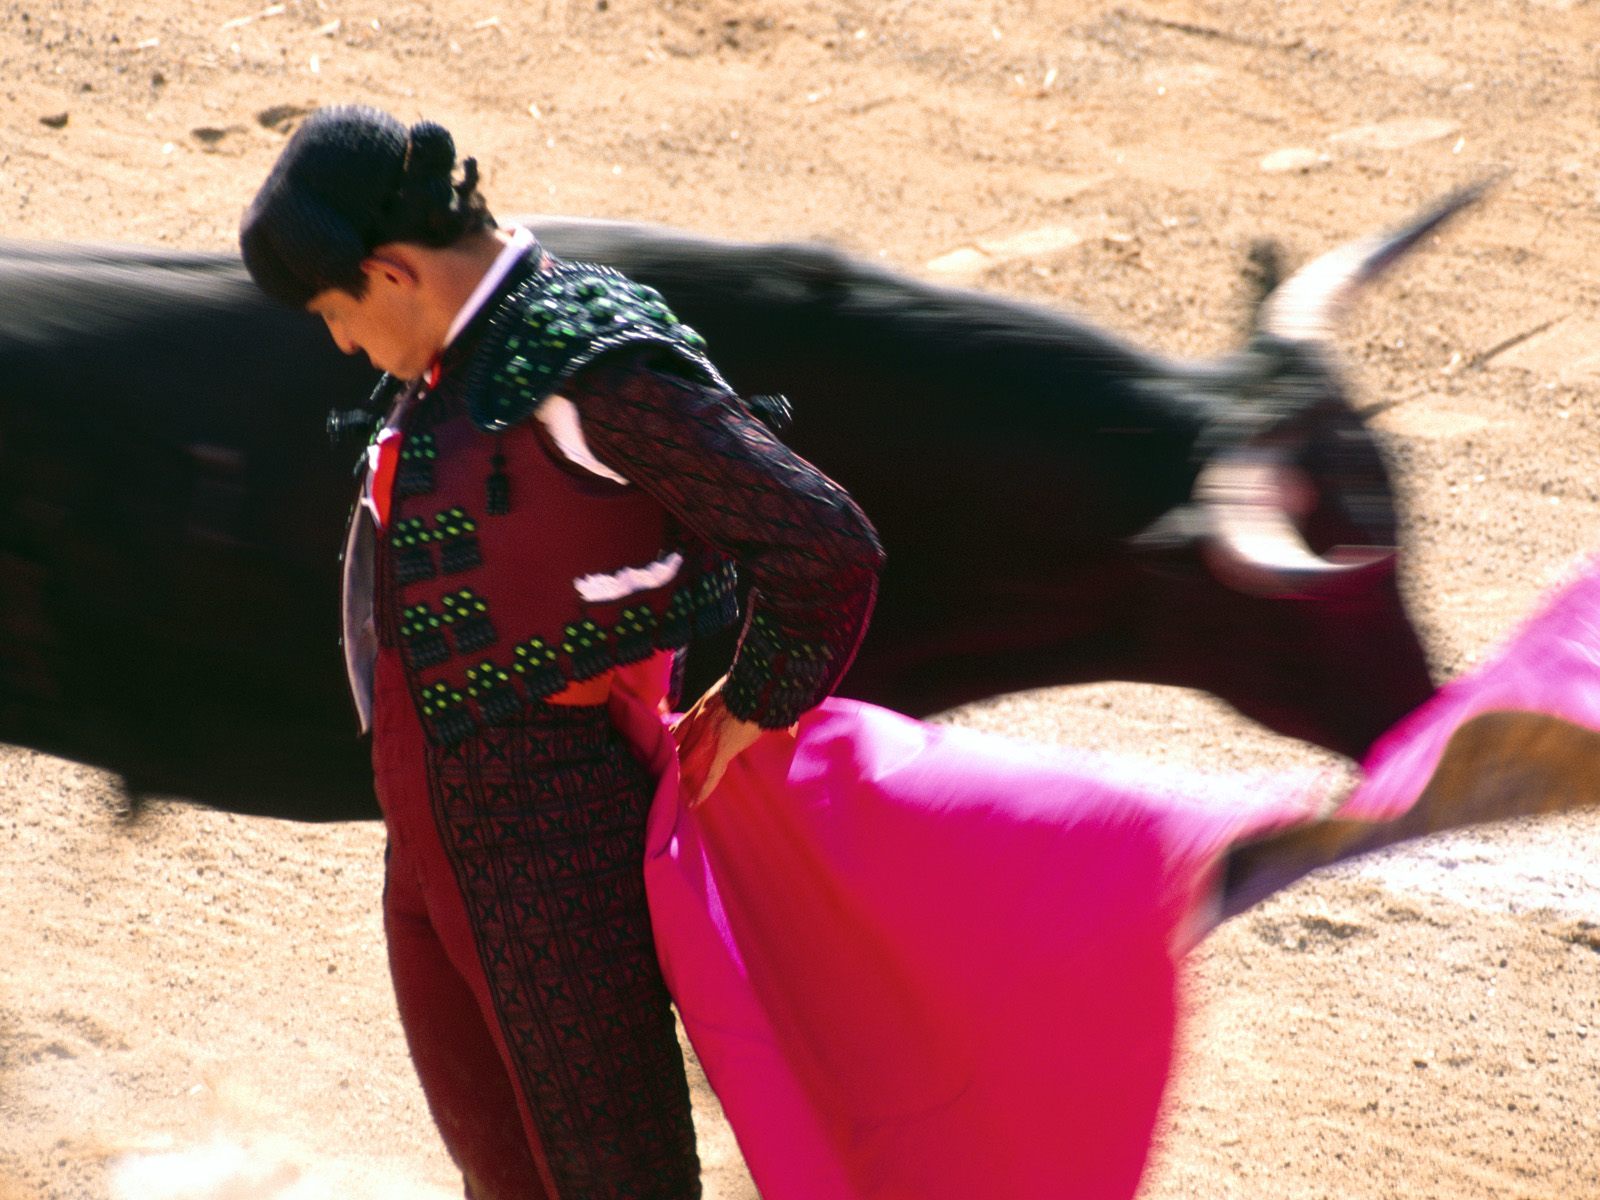 Bull Fighter HD+1600×900, UXGA 1600×1200 – HD Wallpapers Backgrounds Desktop, iphone & Android Free Download